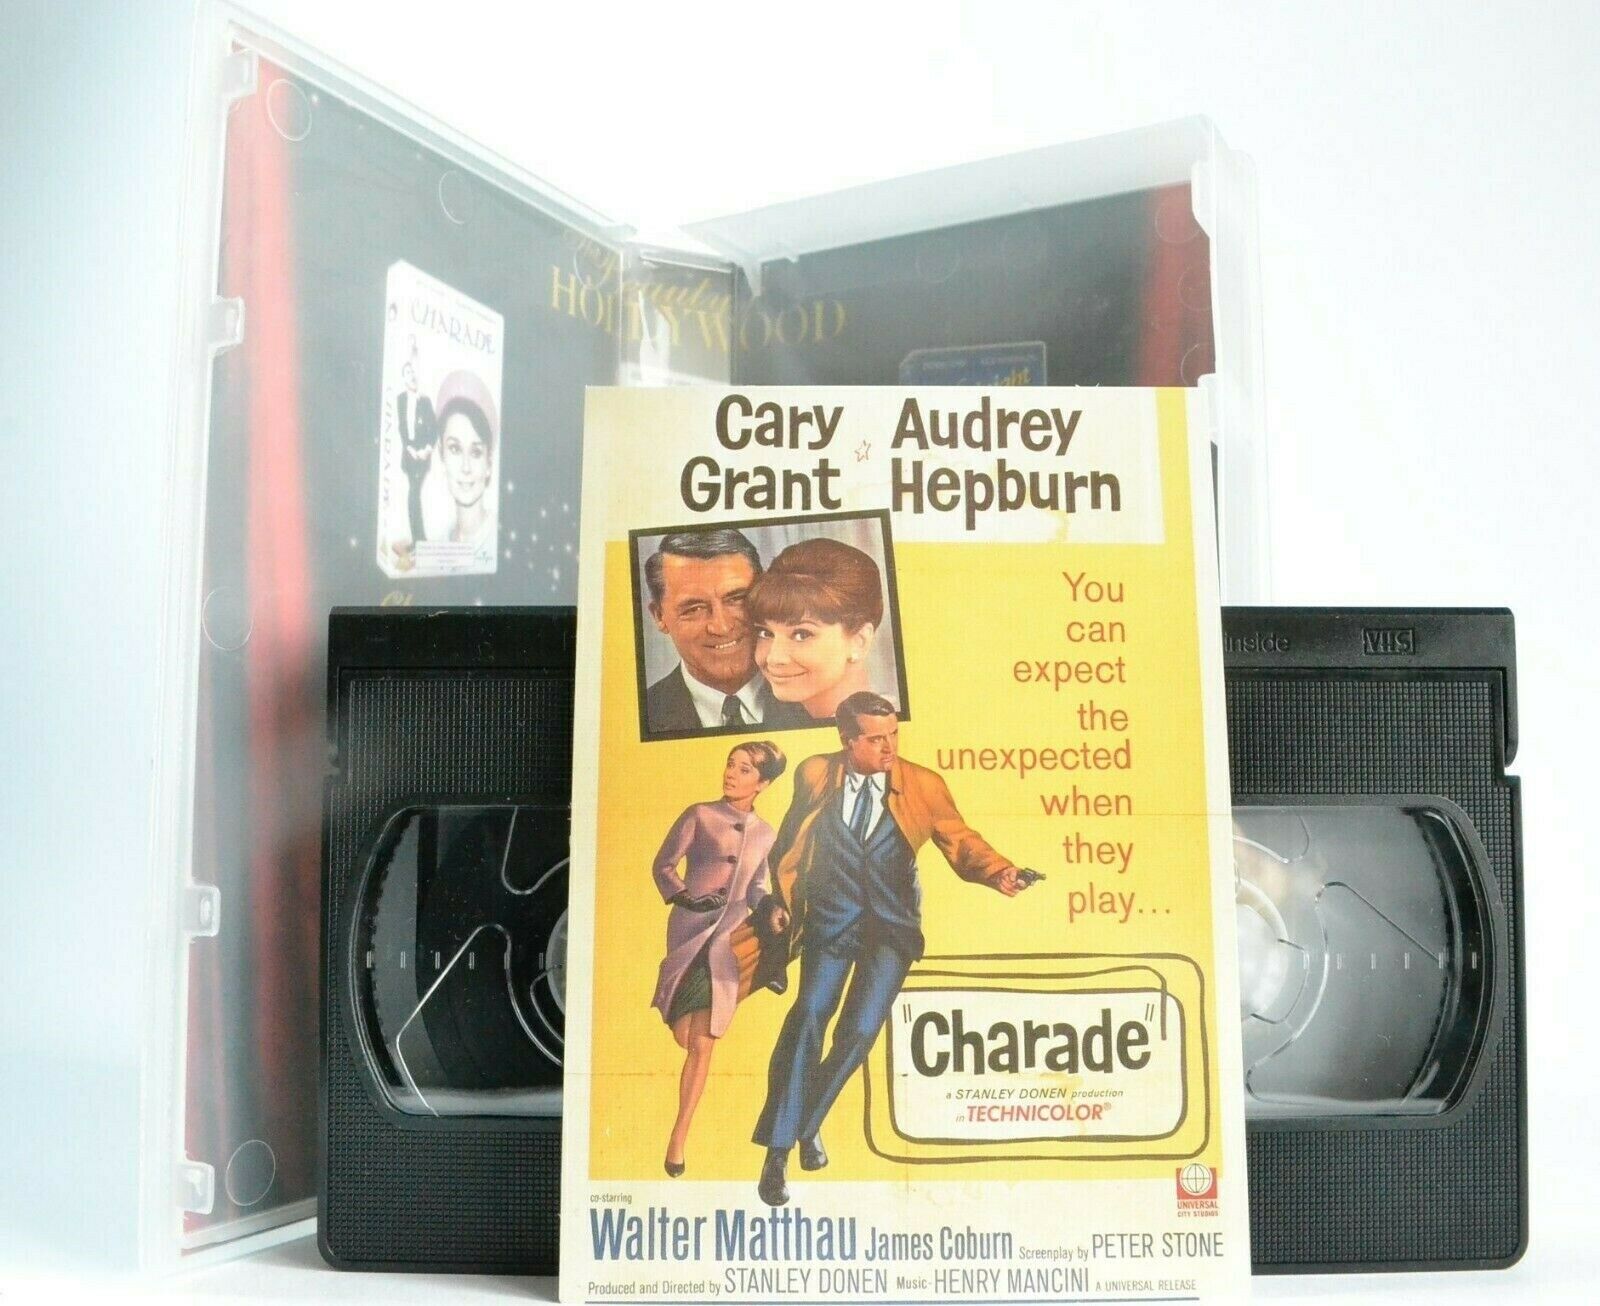 Charade [Postcards Included]: (1966) Thriller - Cary Grant/Audrey Hepburn - VHS-